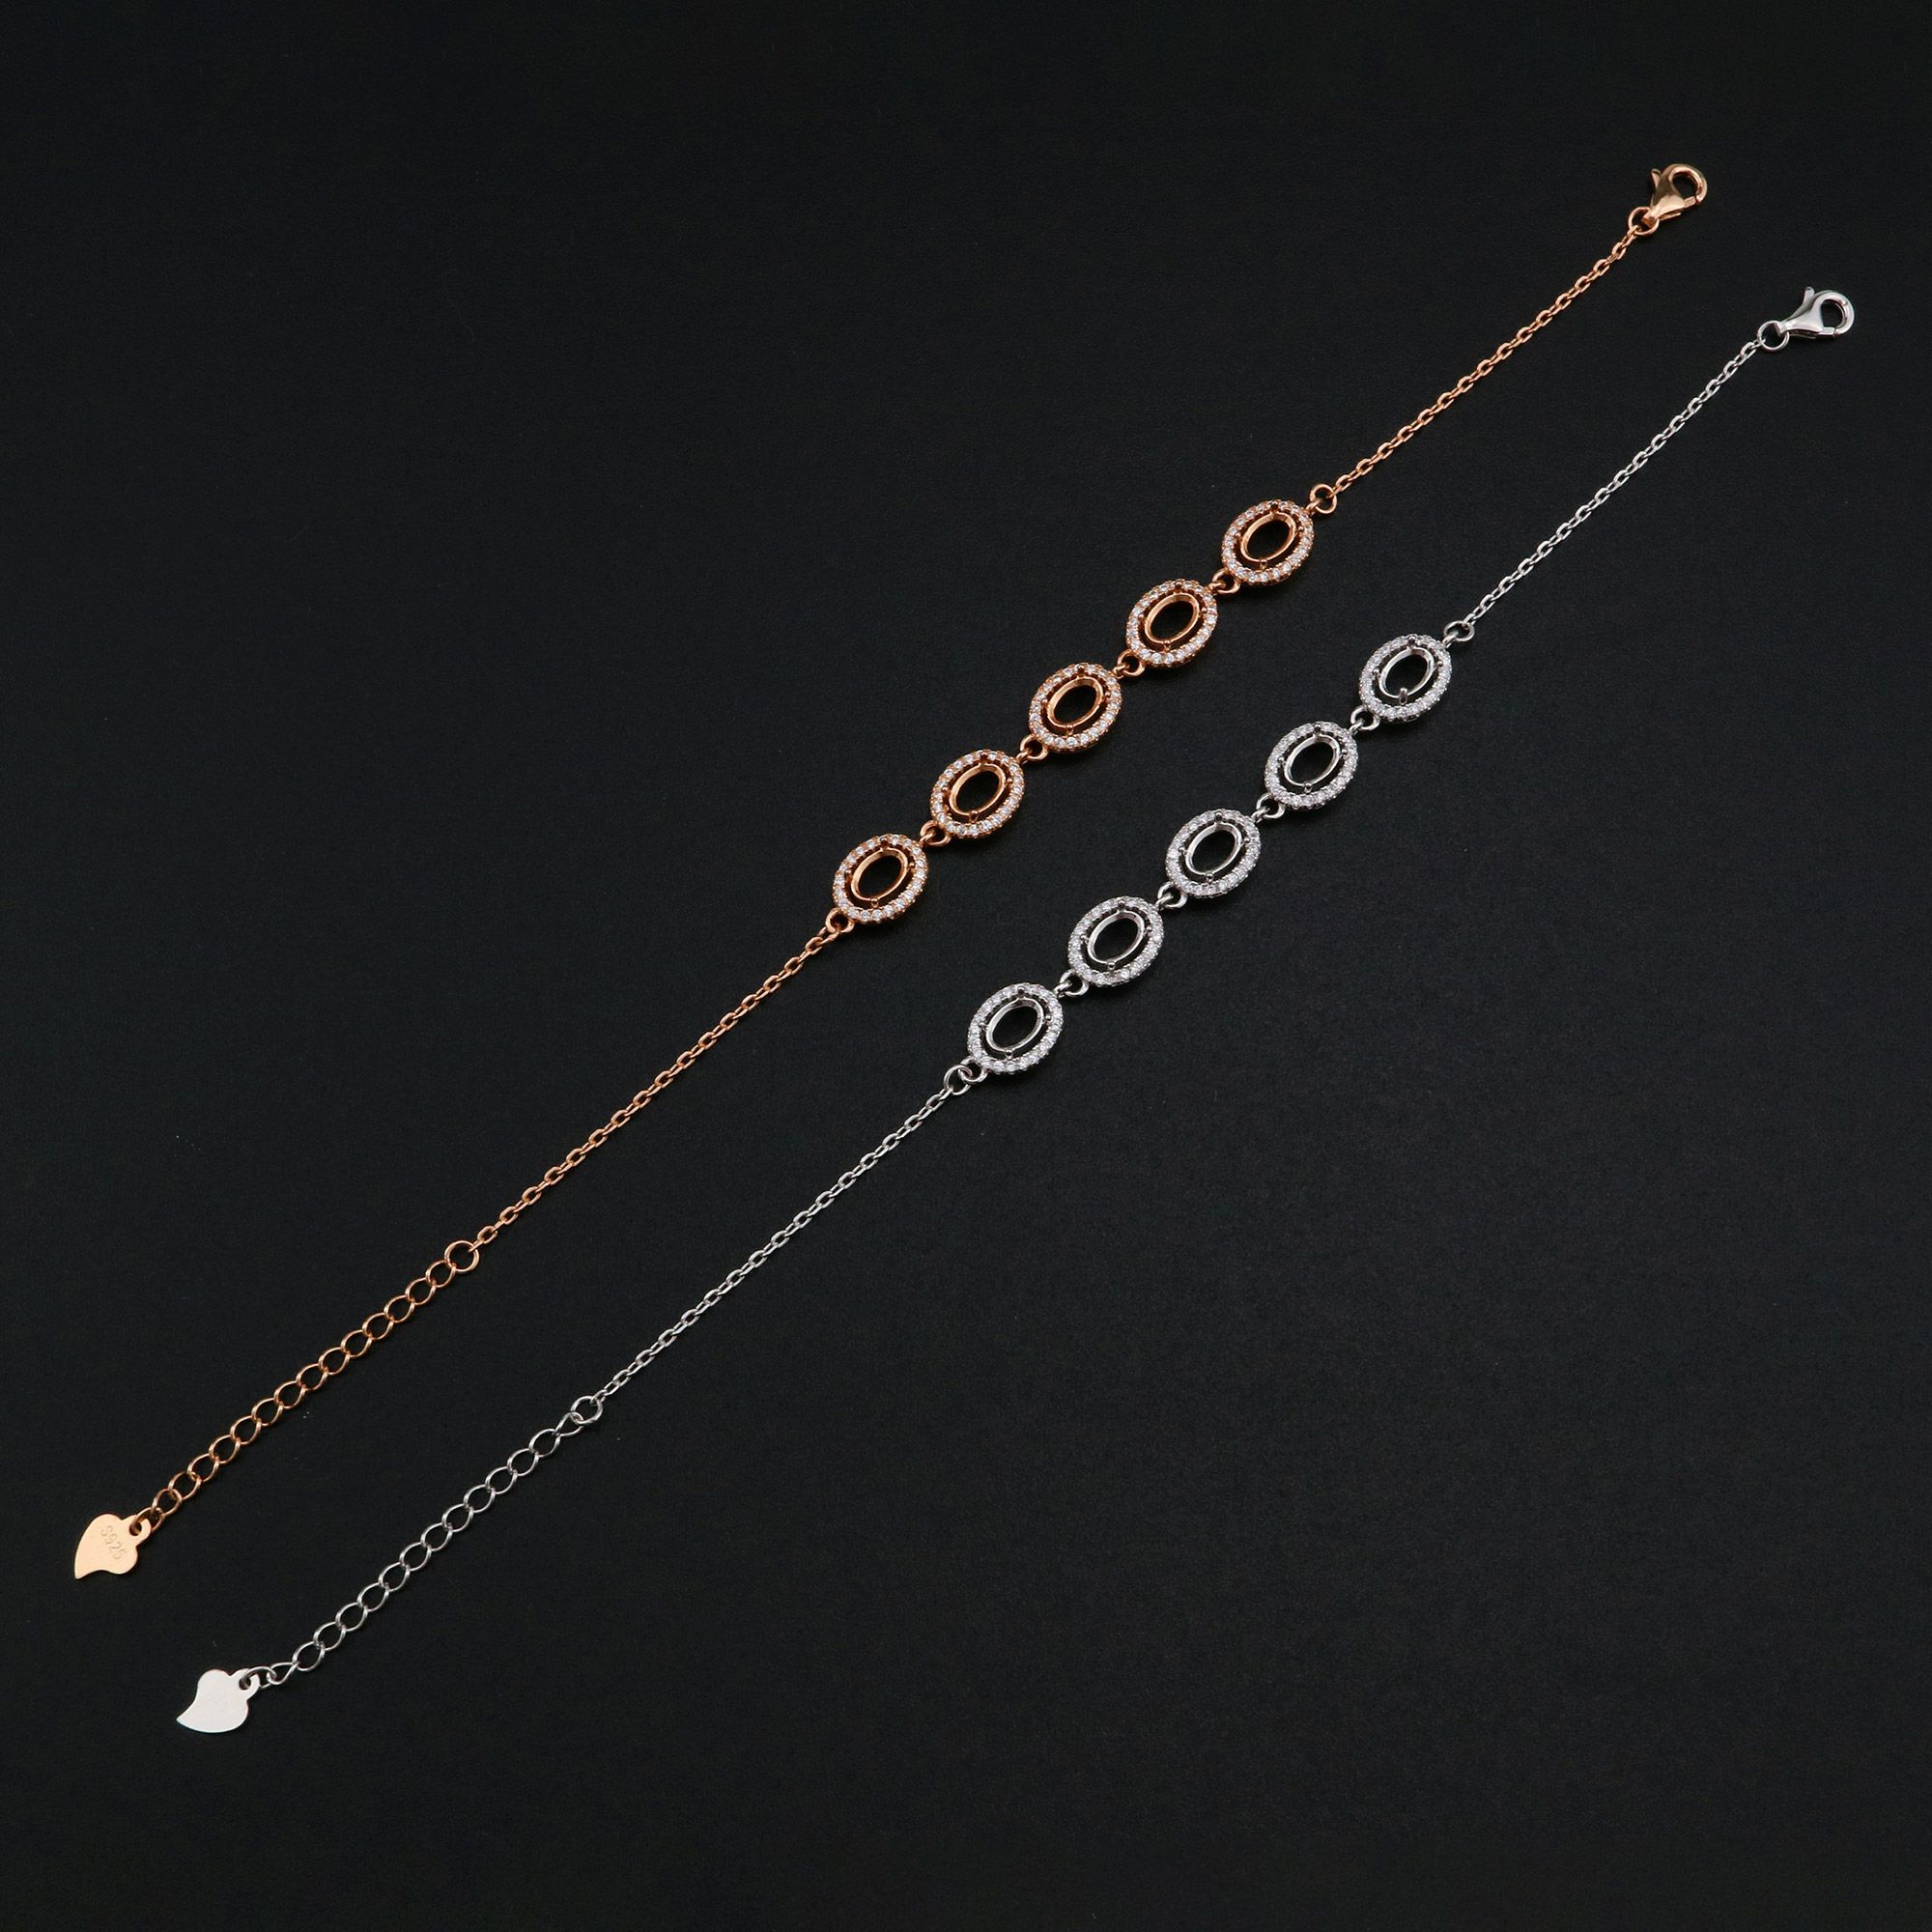 4x6MM Oval Prong Bracelet Settings Halo 5 Stones Rose Gold Plated Solid 925 Sterling Silver Bracelet Bezel with 6''+1.6'' Chain 1900265 - Click Image to Close